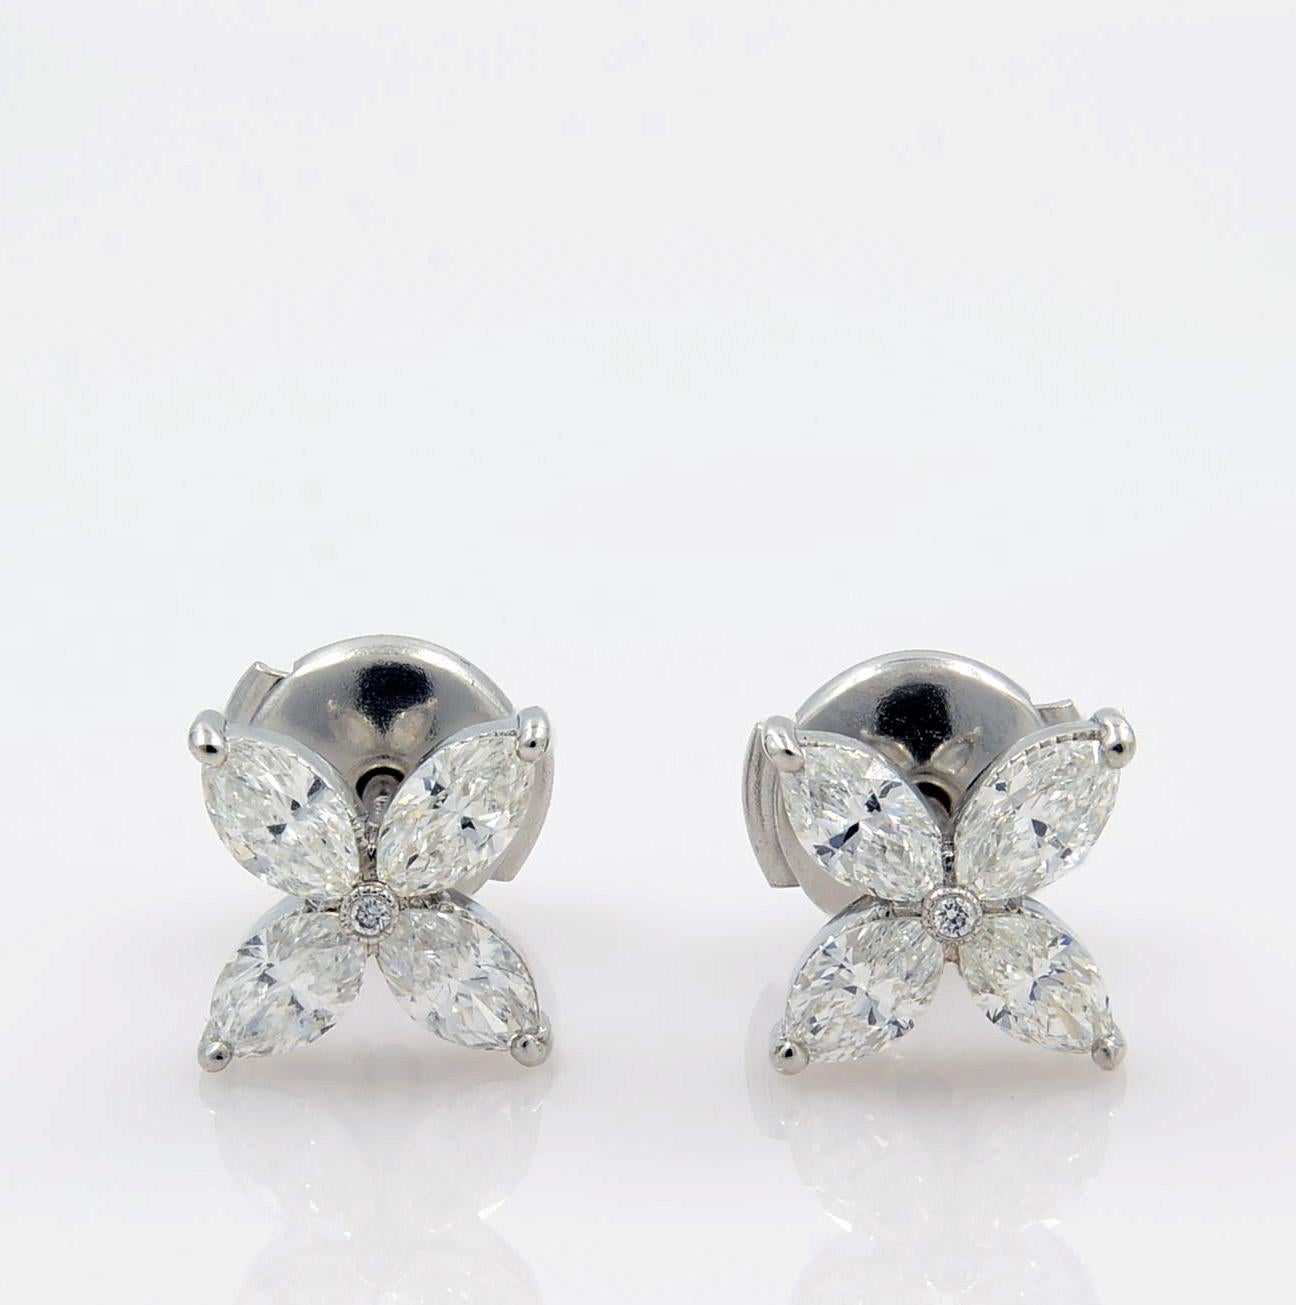 Lovely marquise cut diamond stud earrings set in highly secure designer style platinum mounting. These feminine and super wearable platinum cluster stud earrings are absolutely handmade and a great addition to your jewelry collection. Each earring